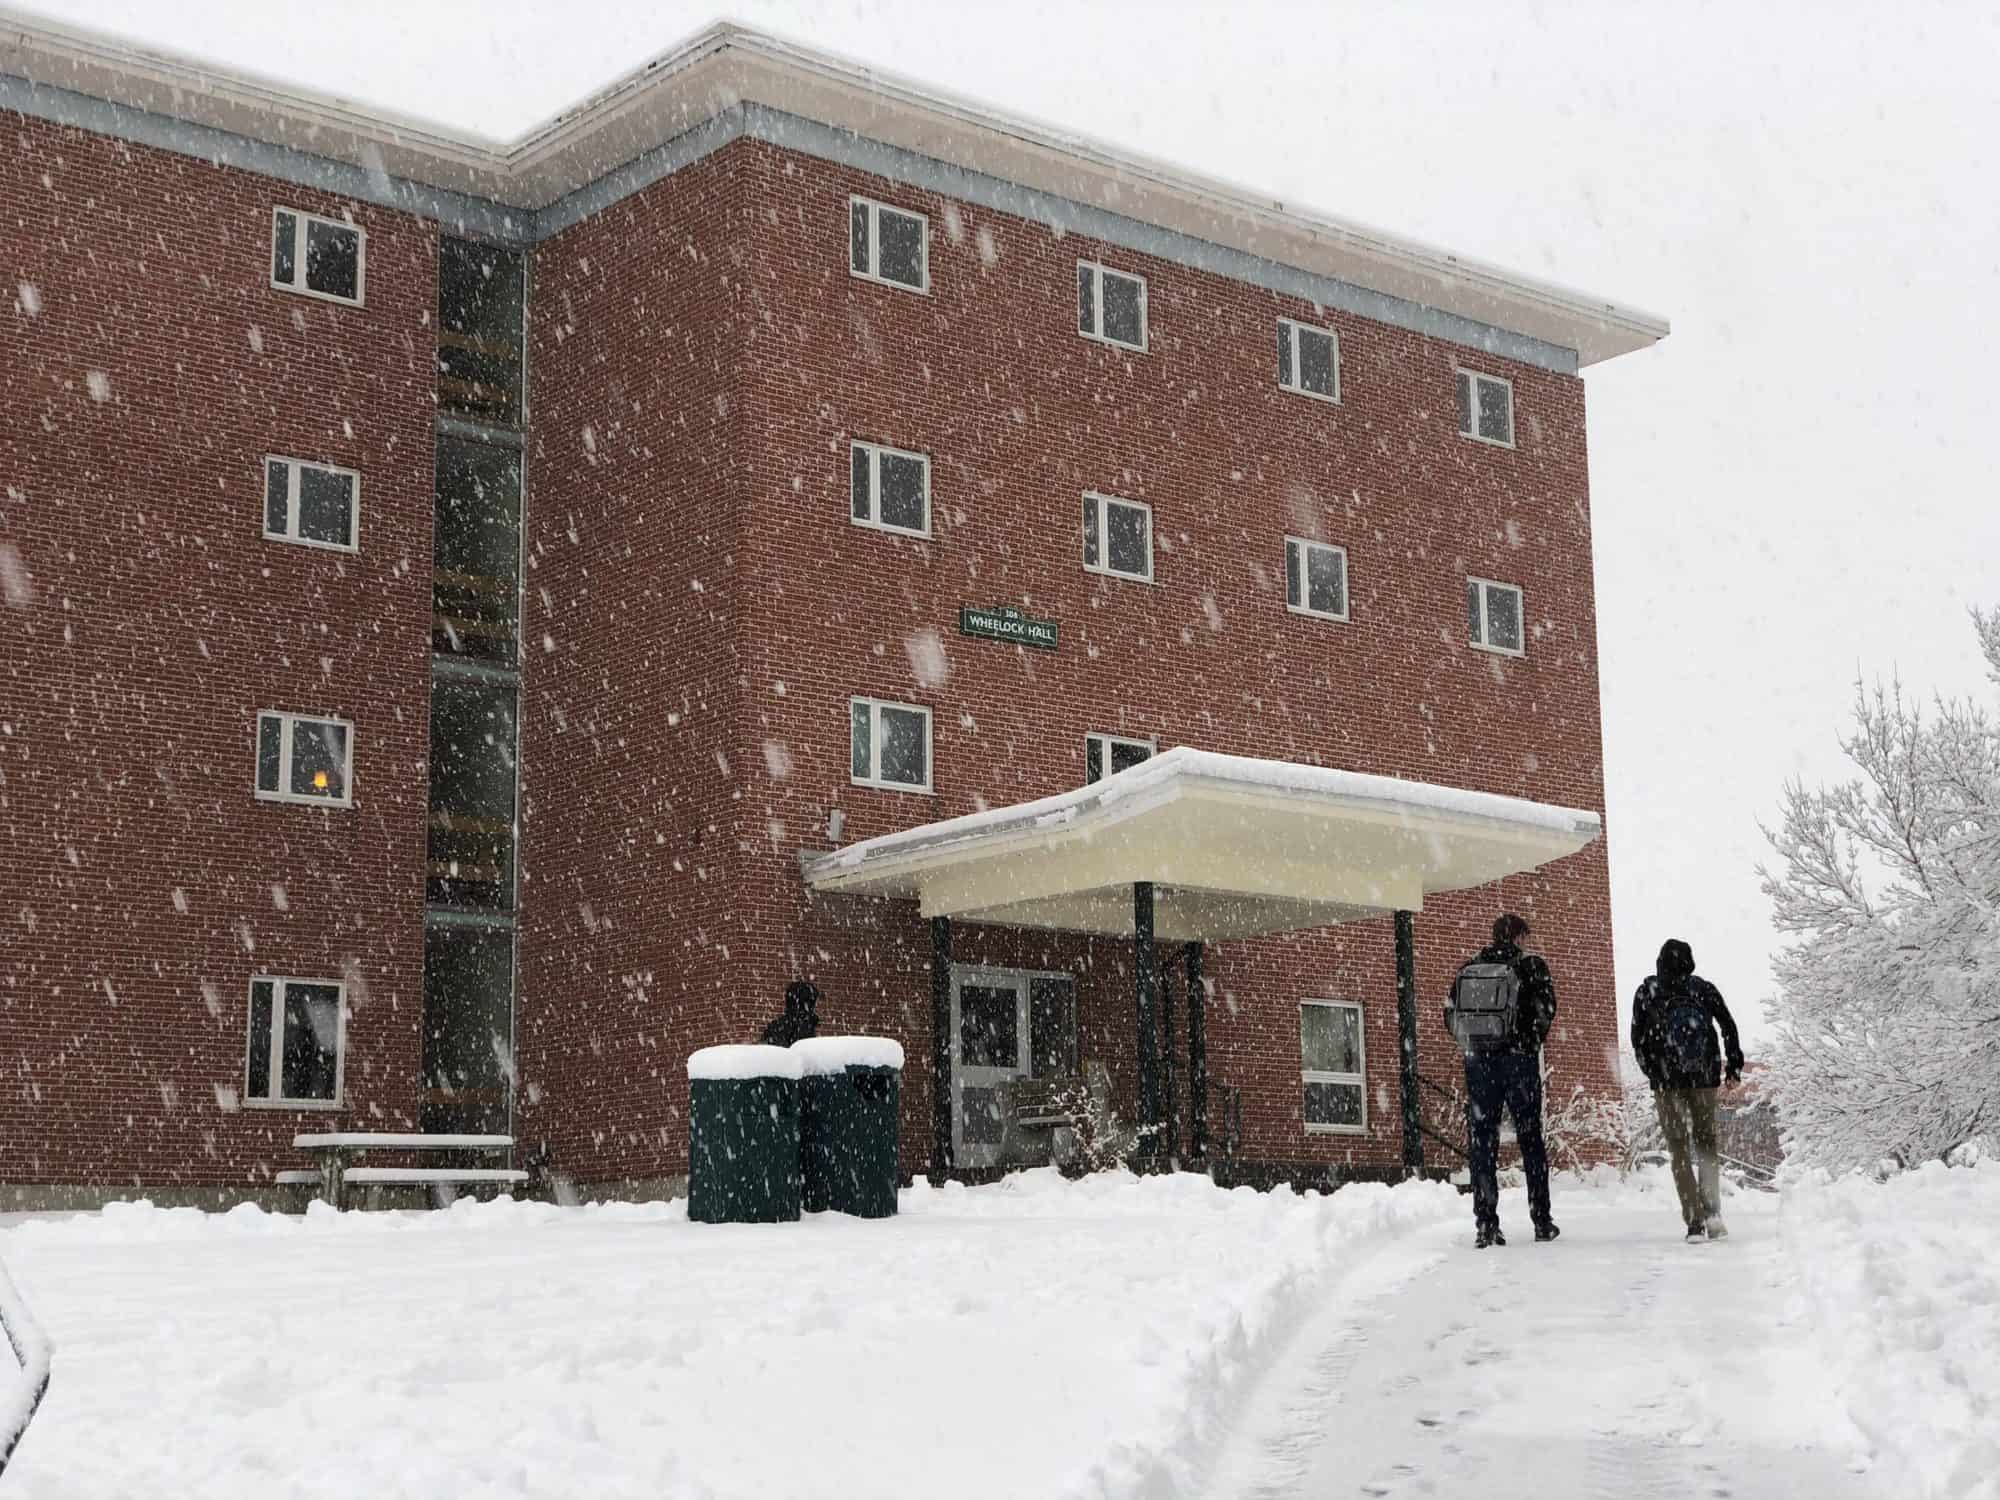 Students walk by the Wheelock residence hall on a snowy day